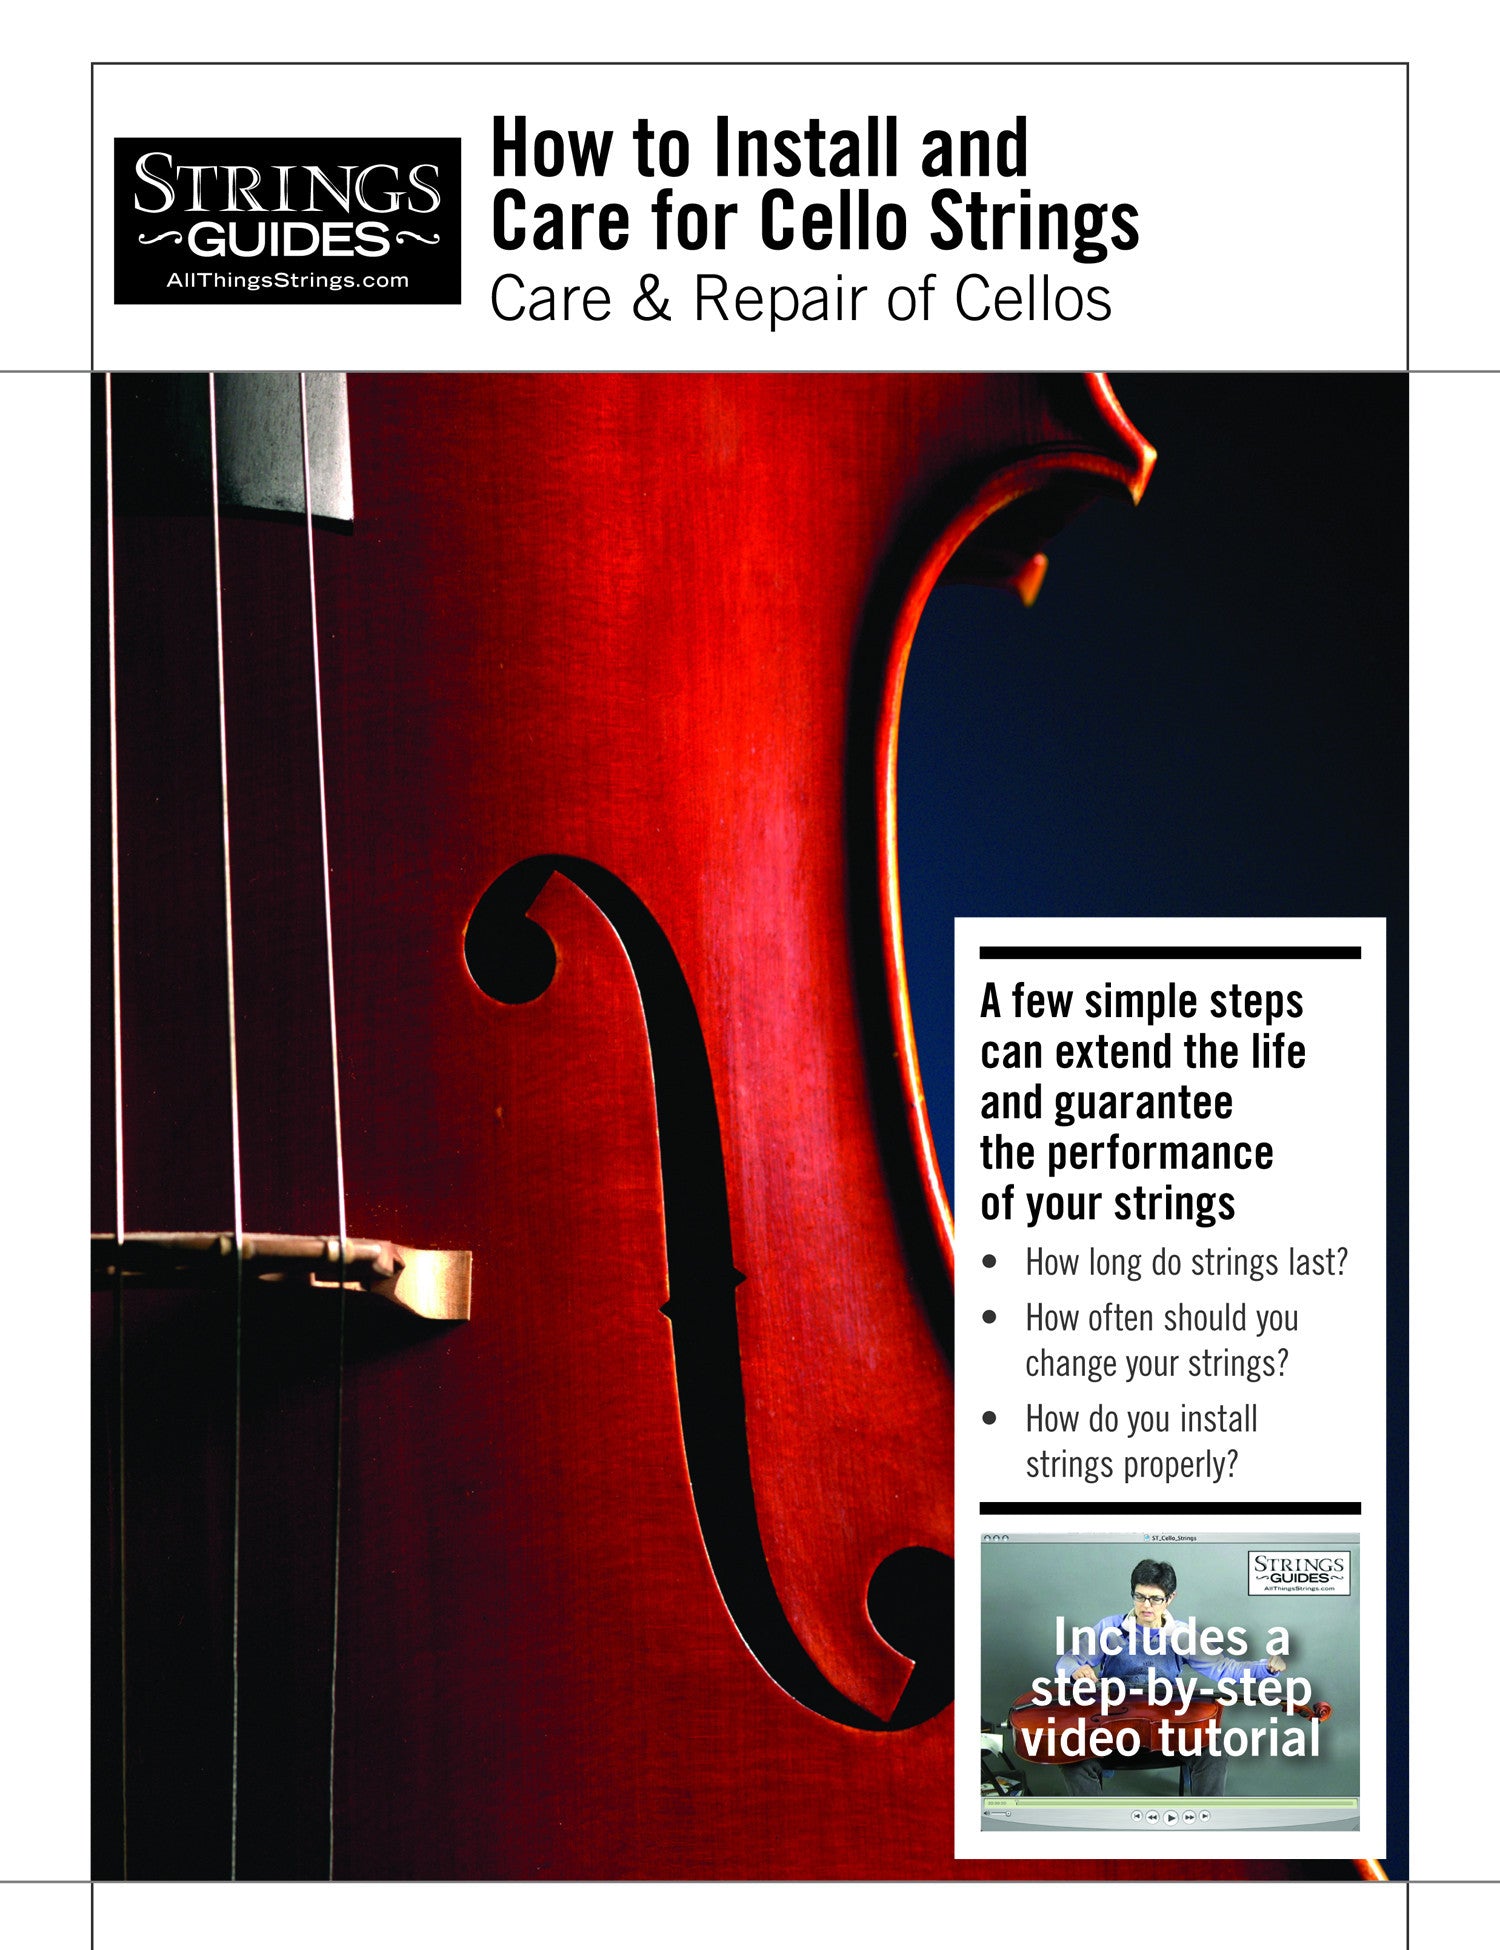 Care and Repair of Cellos: How to Install and Care for Cello Strings